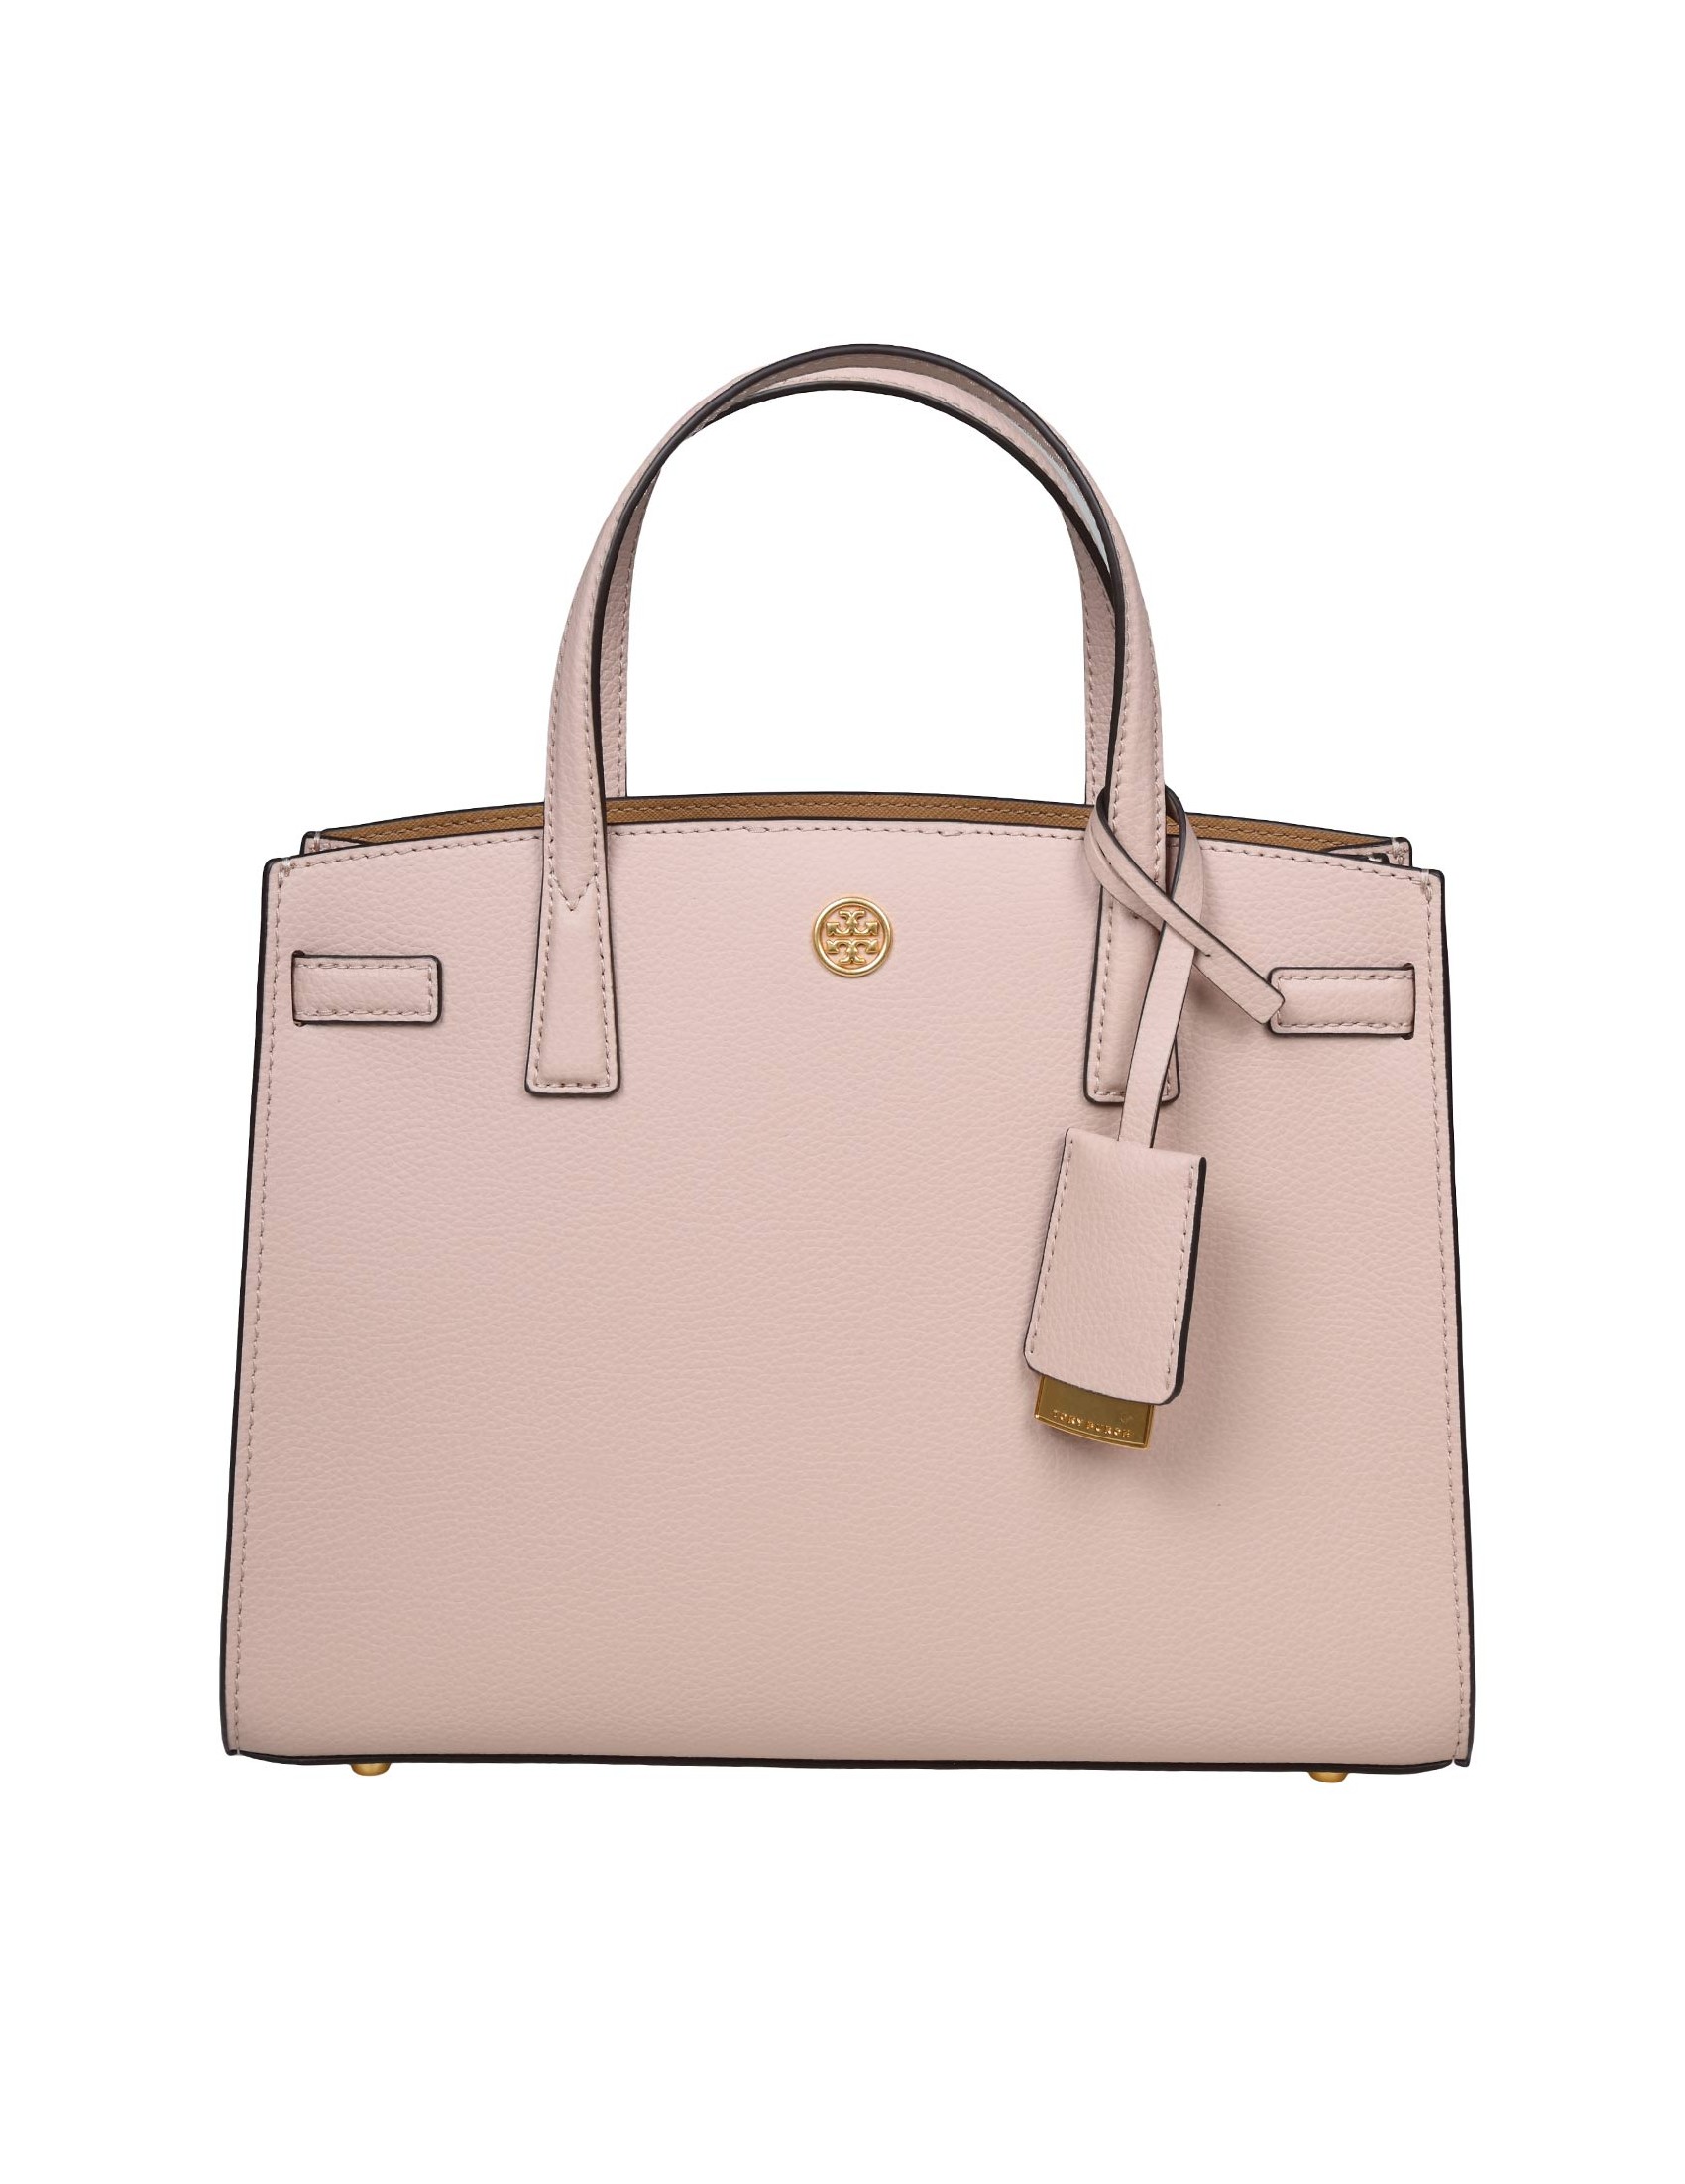 TORY BURCH WALKER SMALL HANDBAG IN SAND COLOR LEATHER